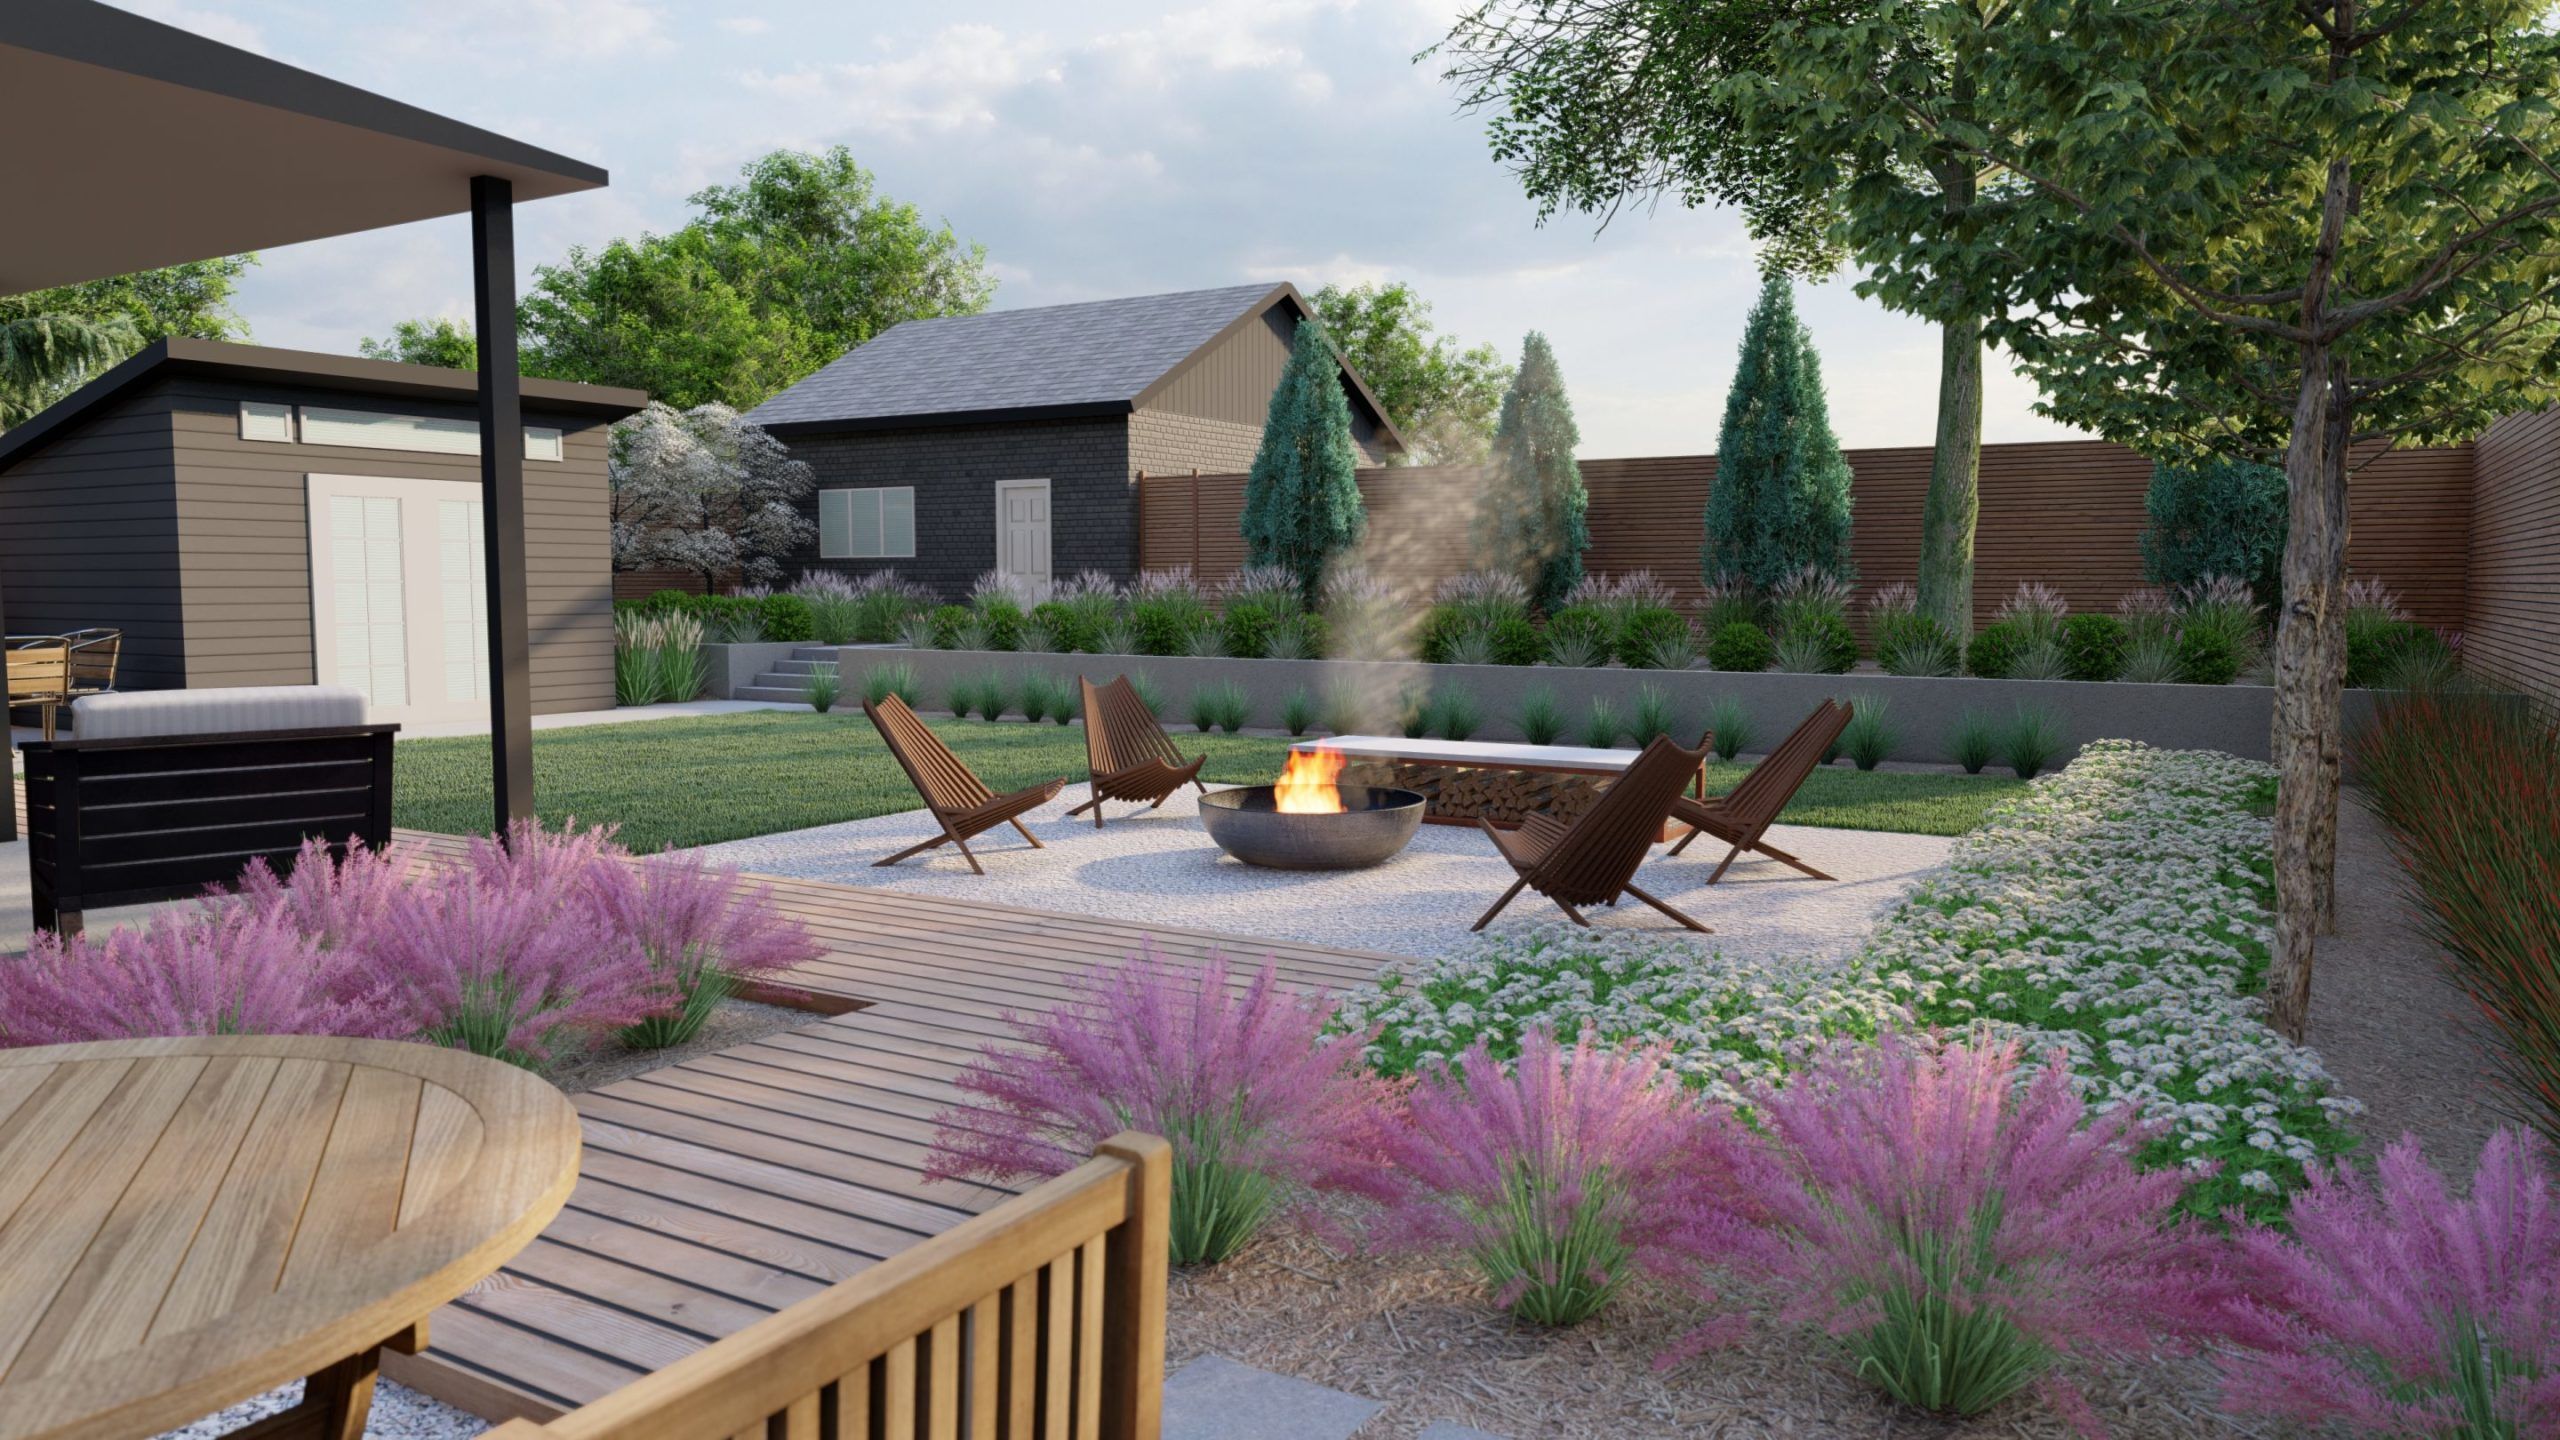 Backyard Design with Fire pIt 